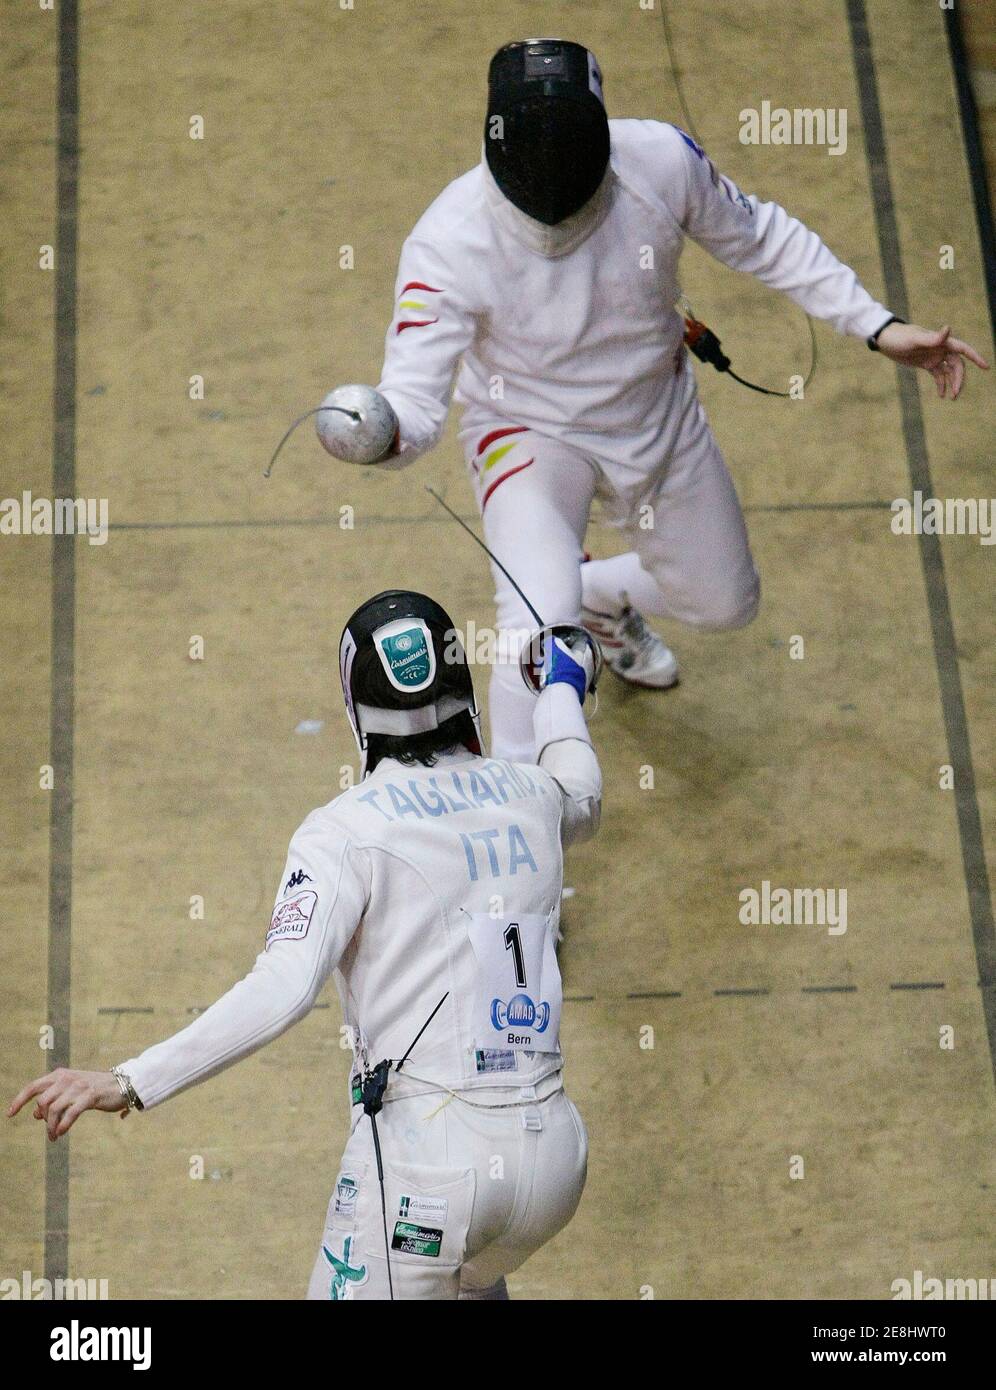 Jose Luis Abajo of Spain (top) fights with Matteo Tagliariol of Italy during the men's epee individual final at the World Cup Fencing tournament Grand Prix de Berne in Bern March 2, 2008. Tagliariol won the tournement. REUTERS/Pascal Lauener (SWITZERLAND) Stock Photo